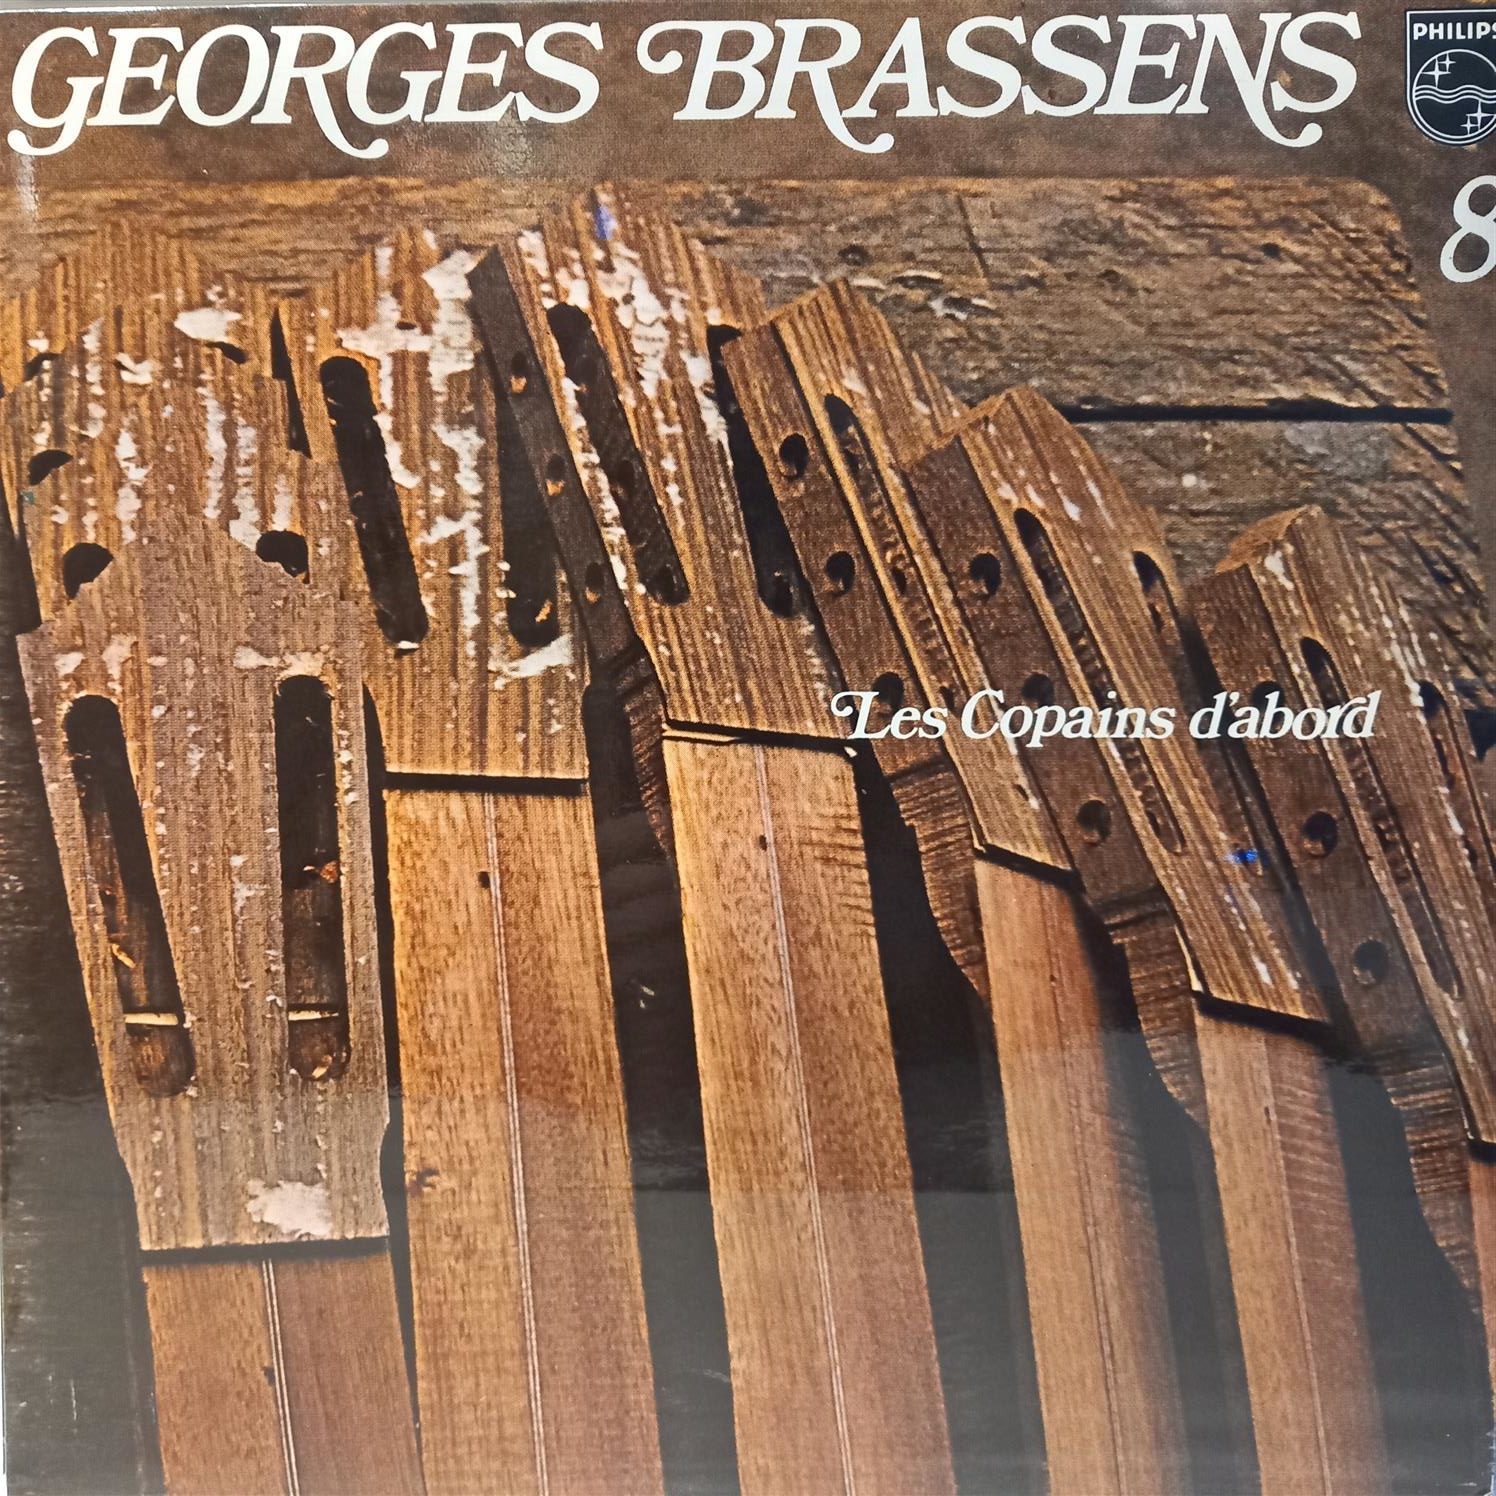 GEORGES BRASSENS – LES COPAINS D’ABORD ON